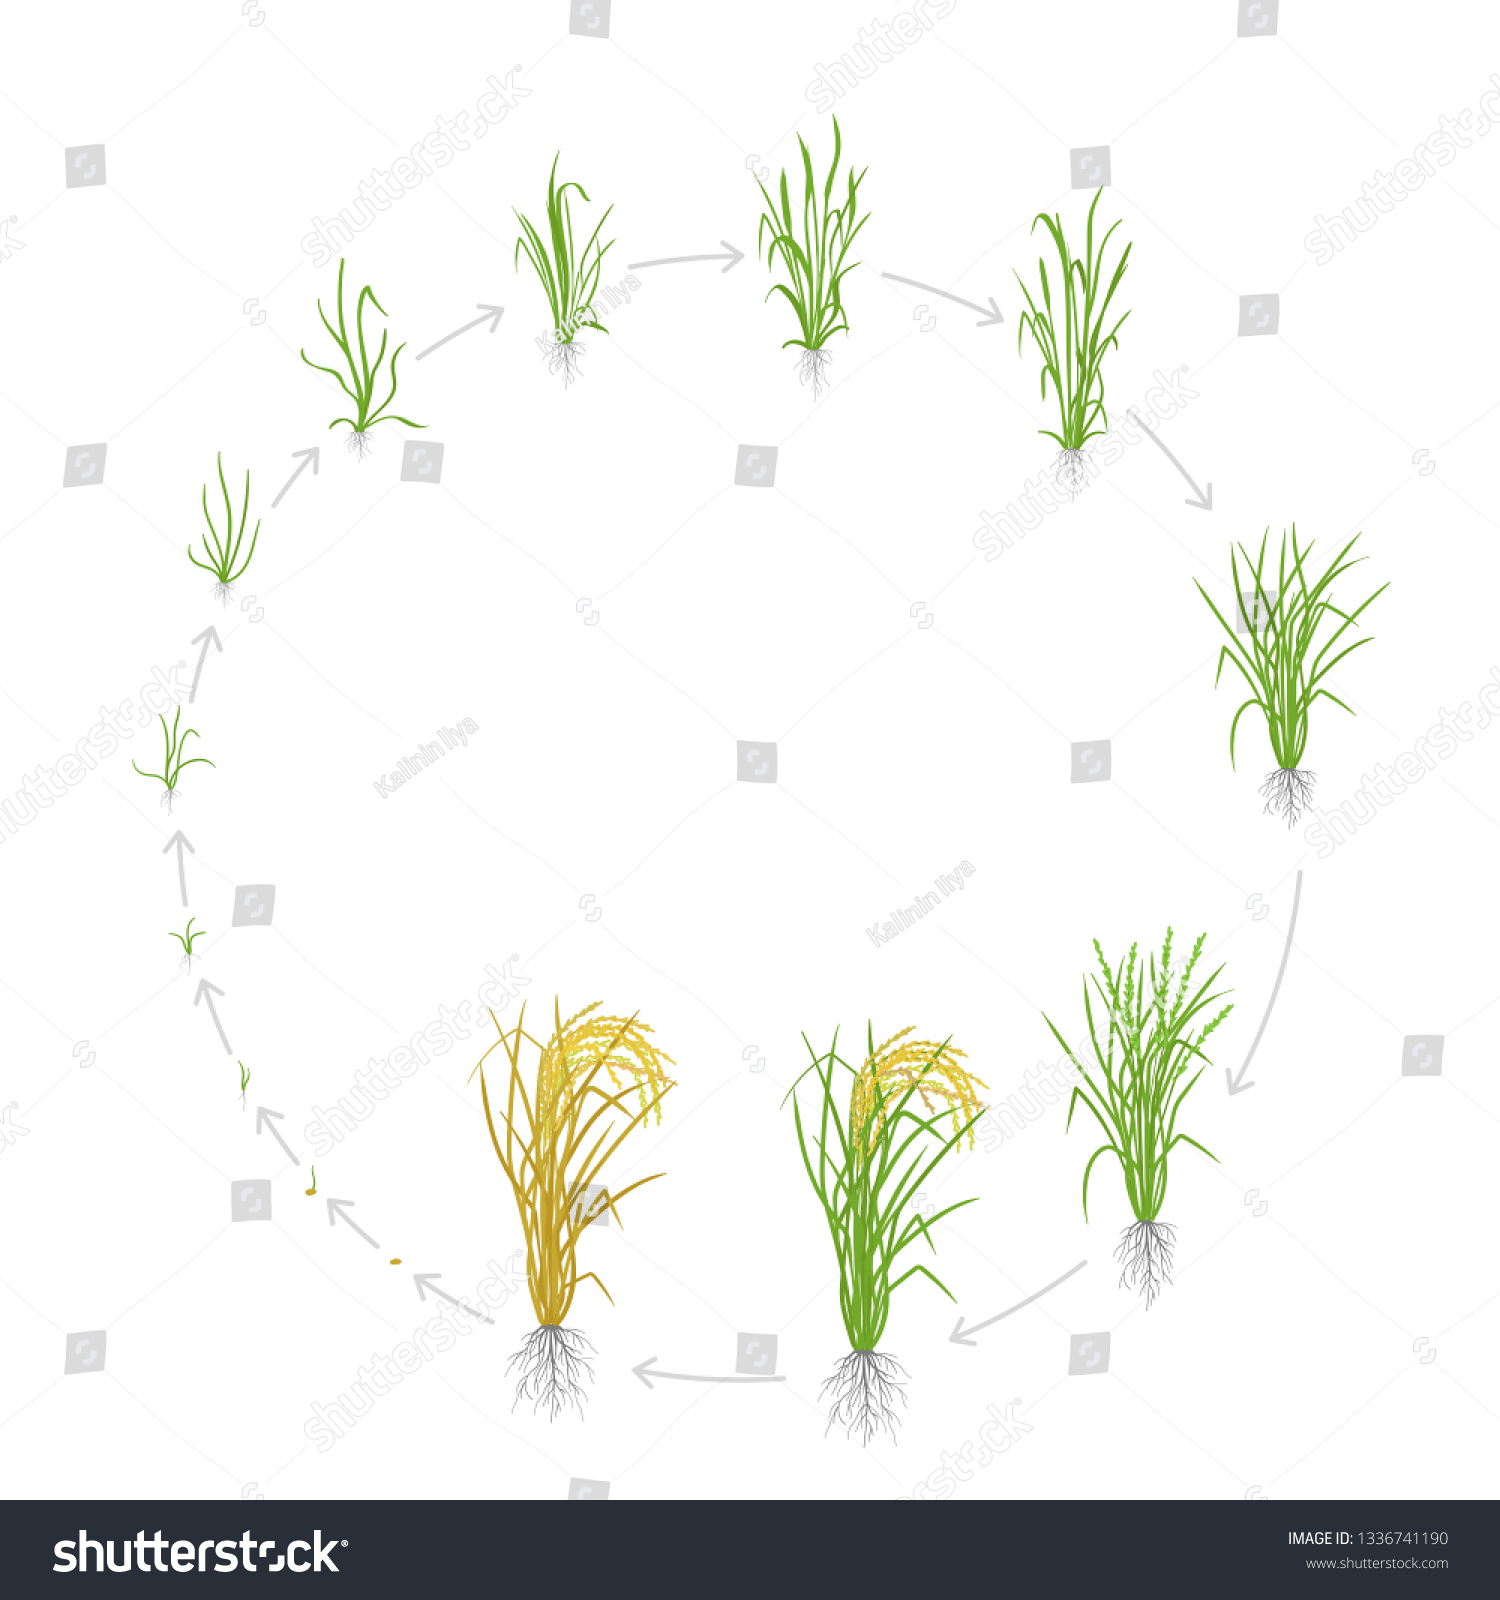 SVG of Circular life cycle of rice. Growth stages of rice plant. Rice increase phases. Vector illustration. Oryza sativa. Ripening period. Use fertilizers. svg